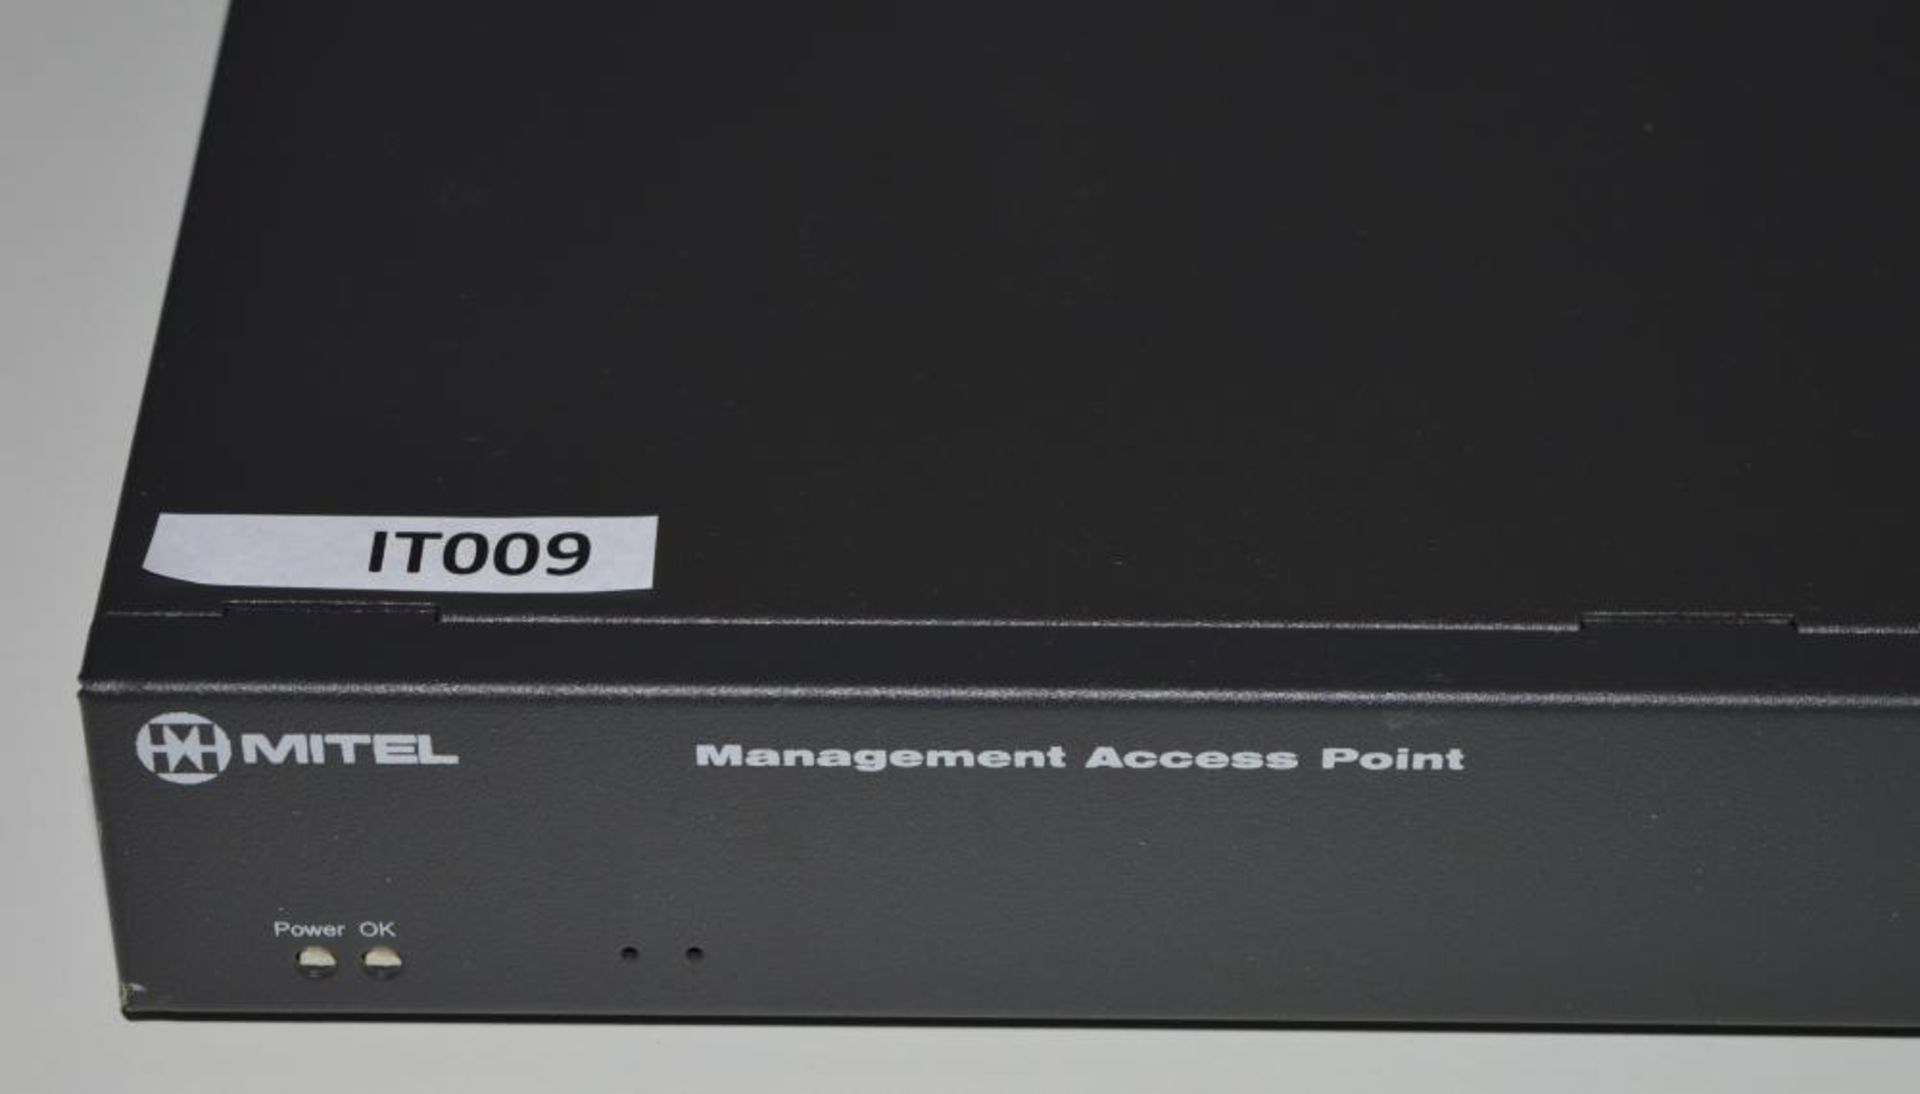 1 x Mitel 2740 Management Access Point - Model Number 13-0602 - CL240 - Ref IT009 - Location: - Image 2 of 6